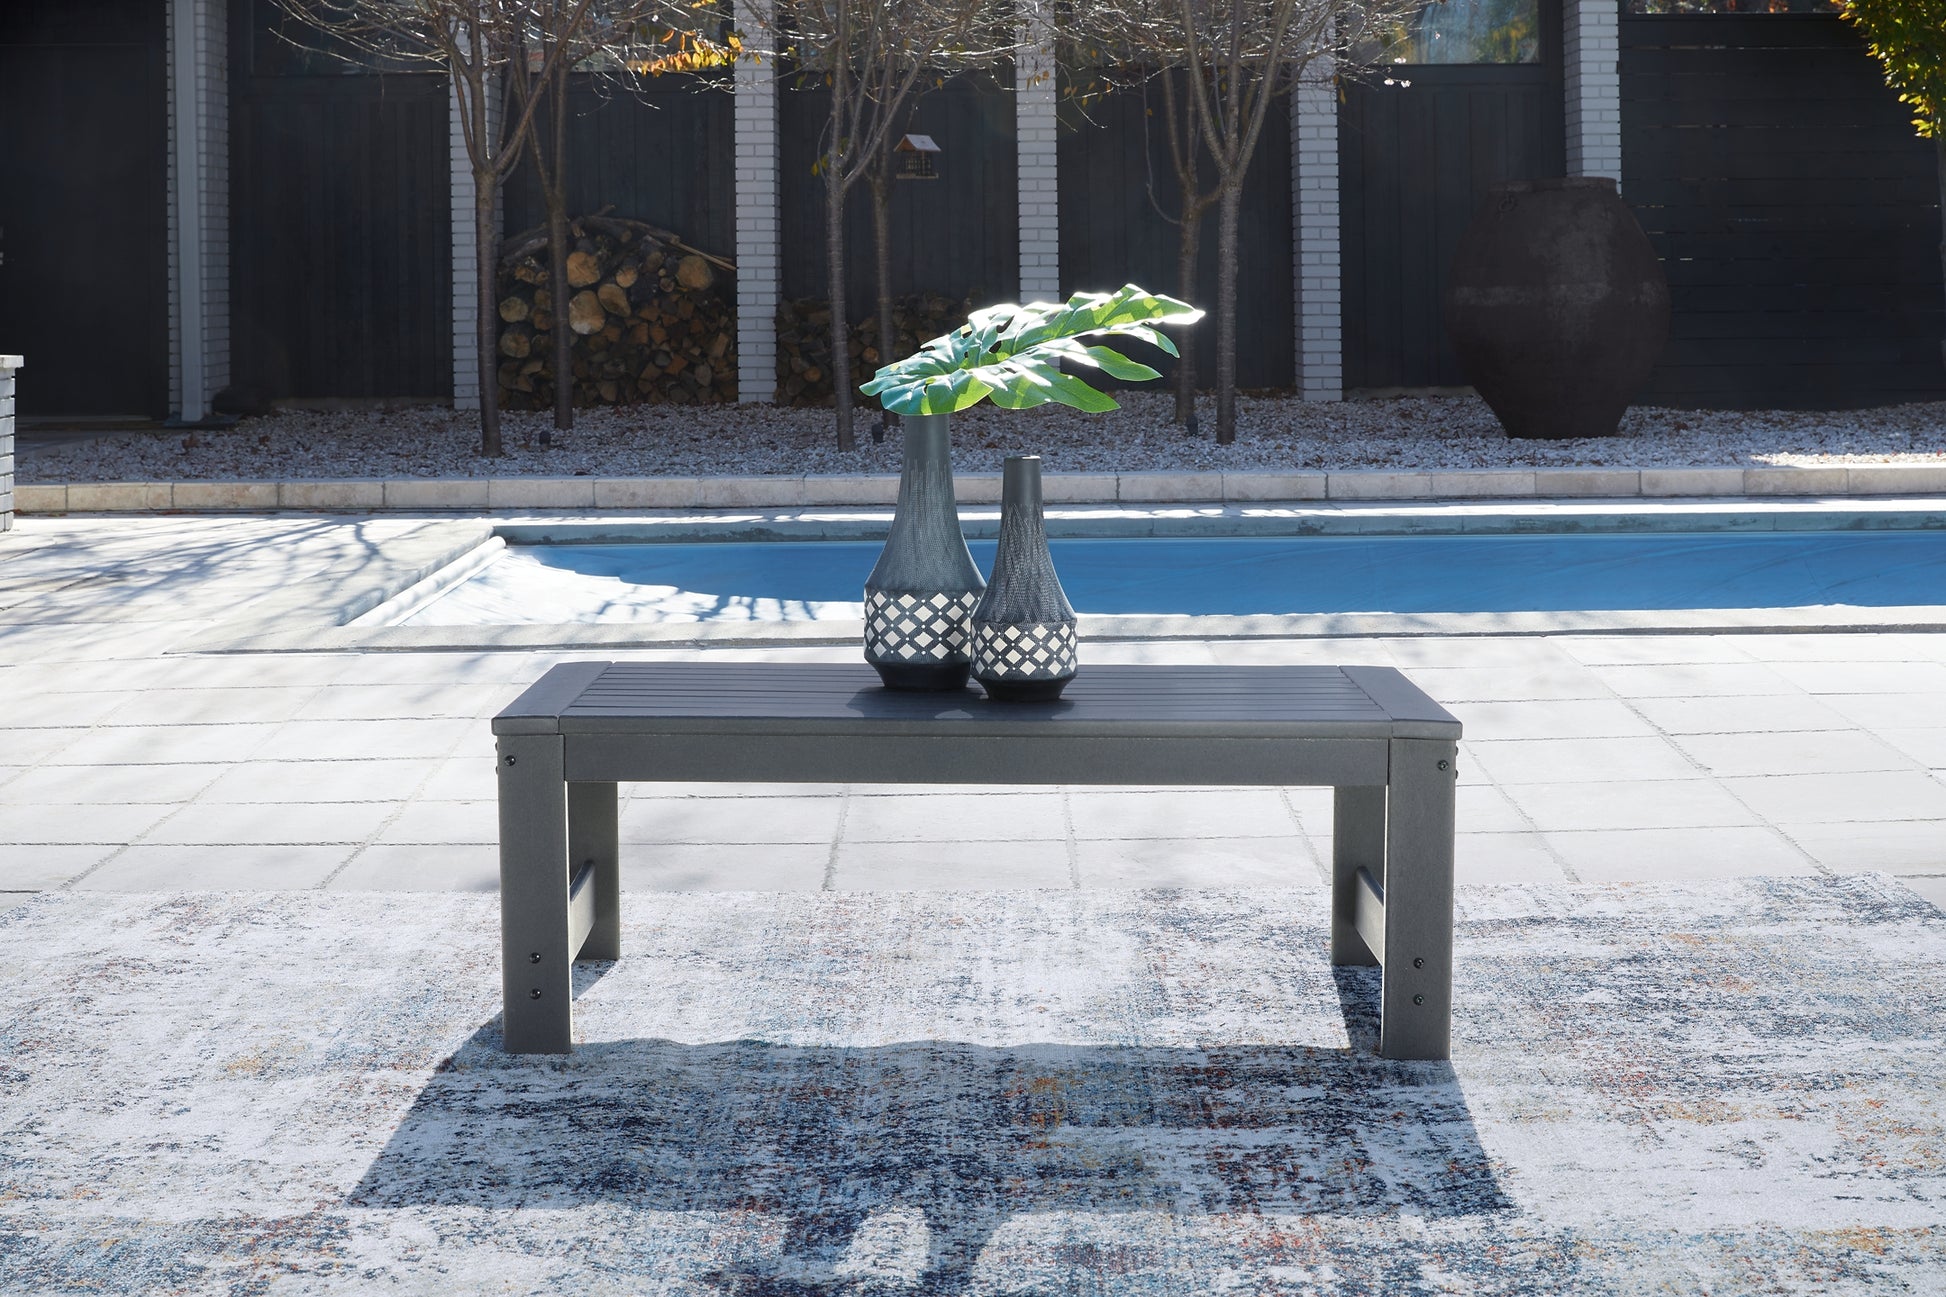 Amora Outdoor Sofa with Coffee Table Signature Design by Ashley®